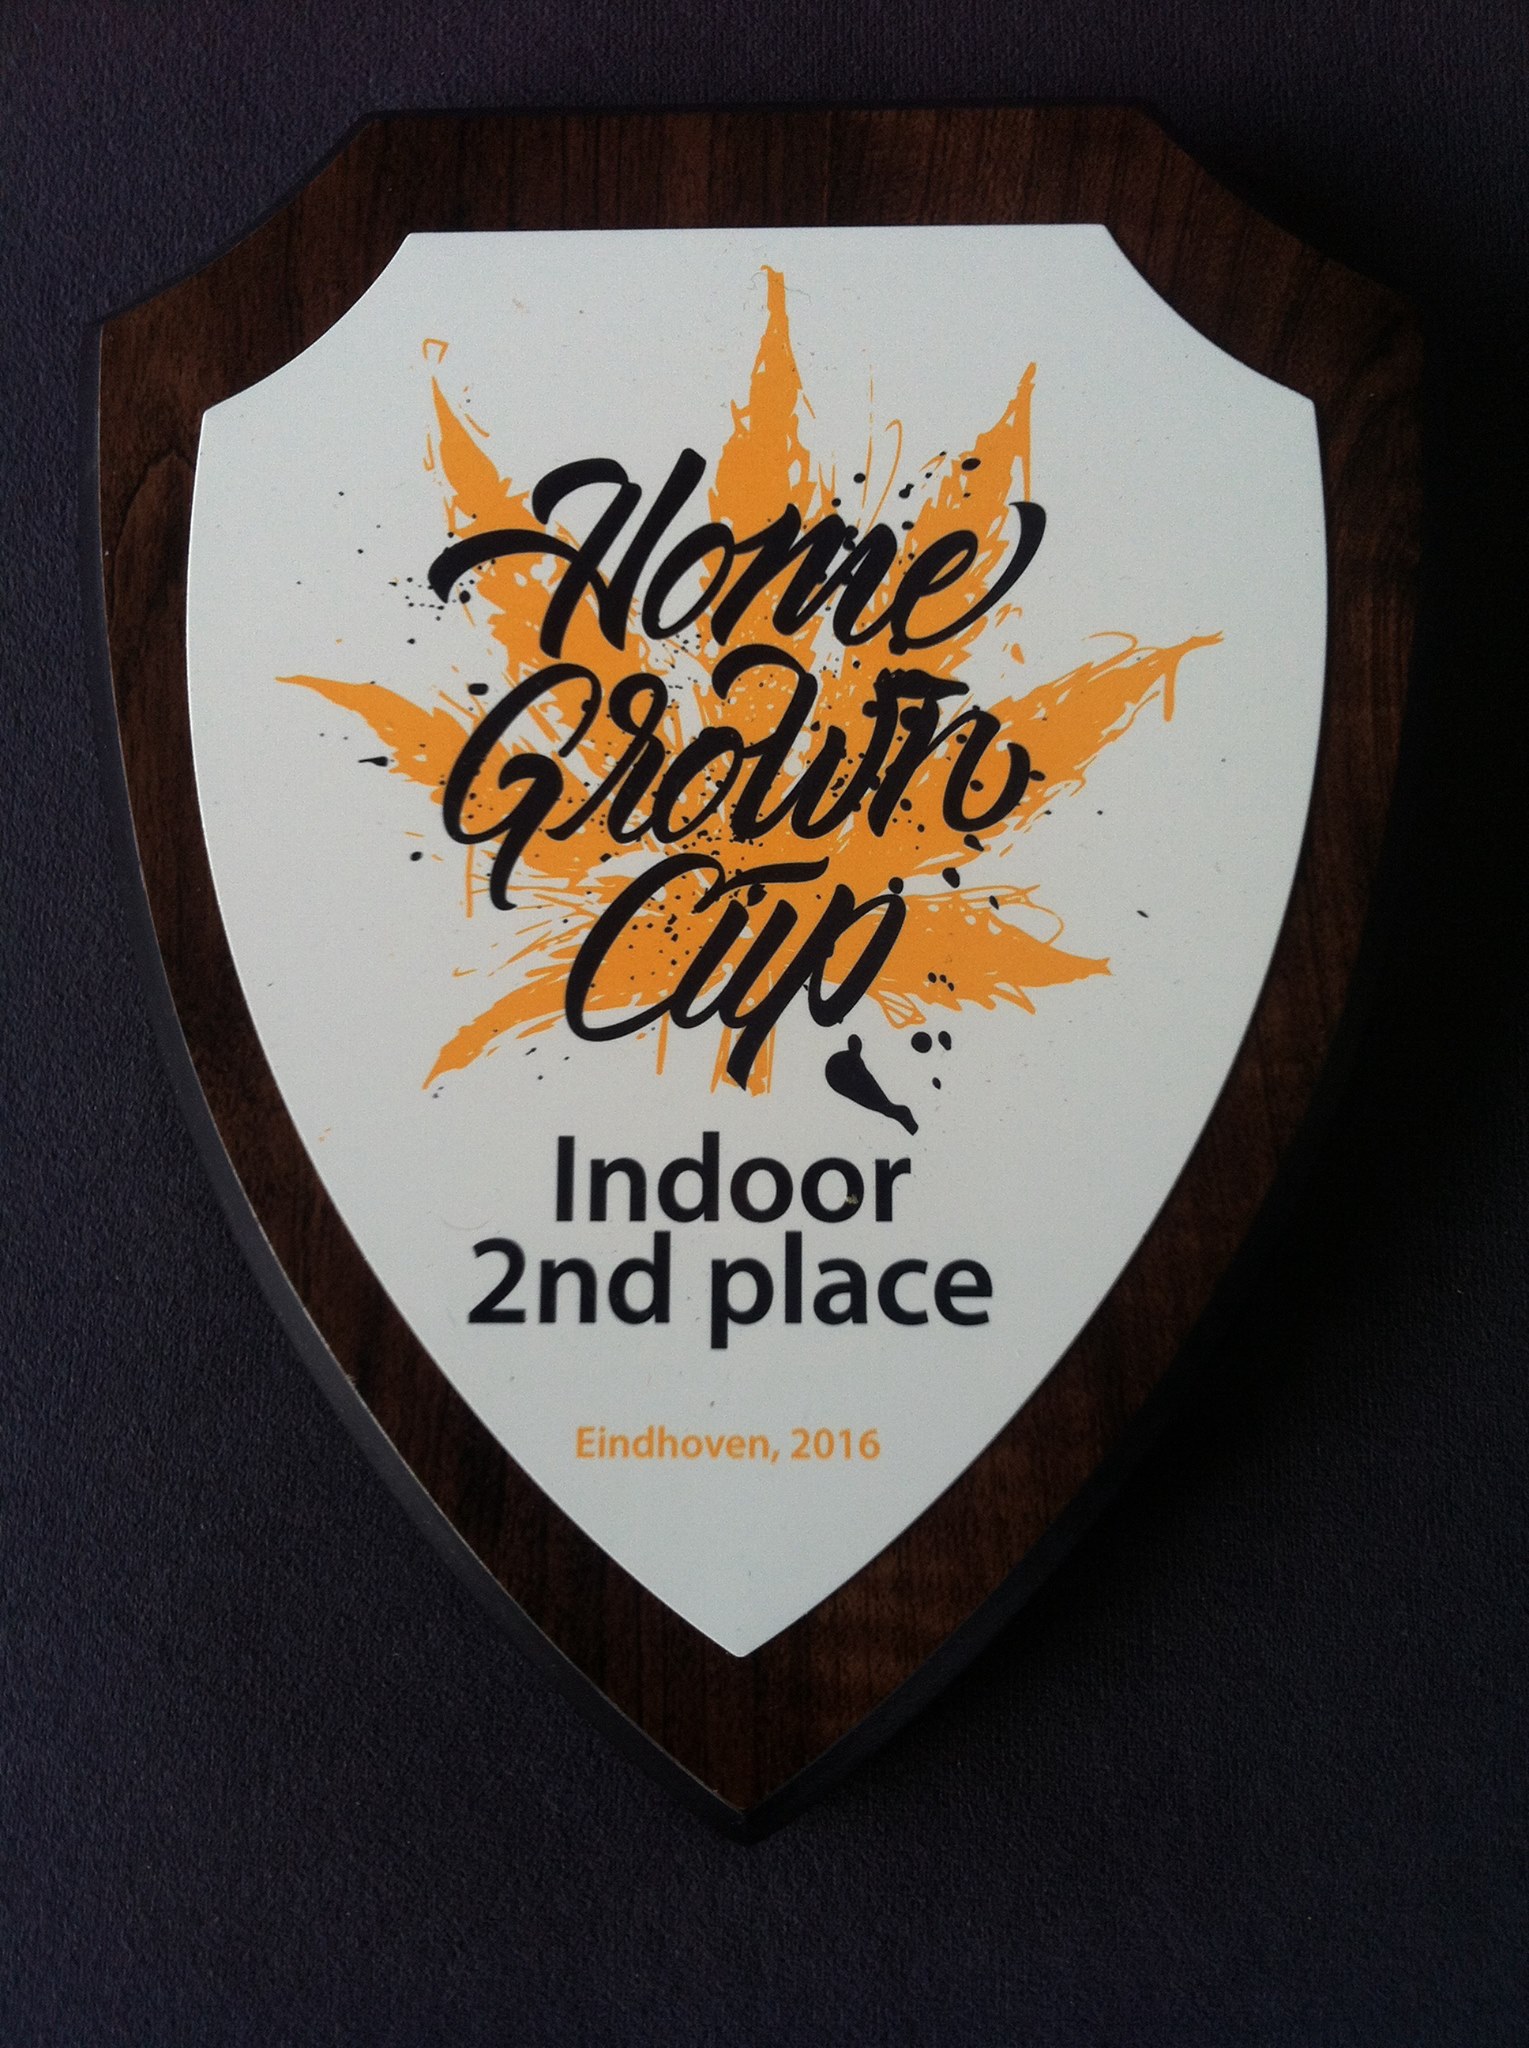 Homegrown Cup